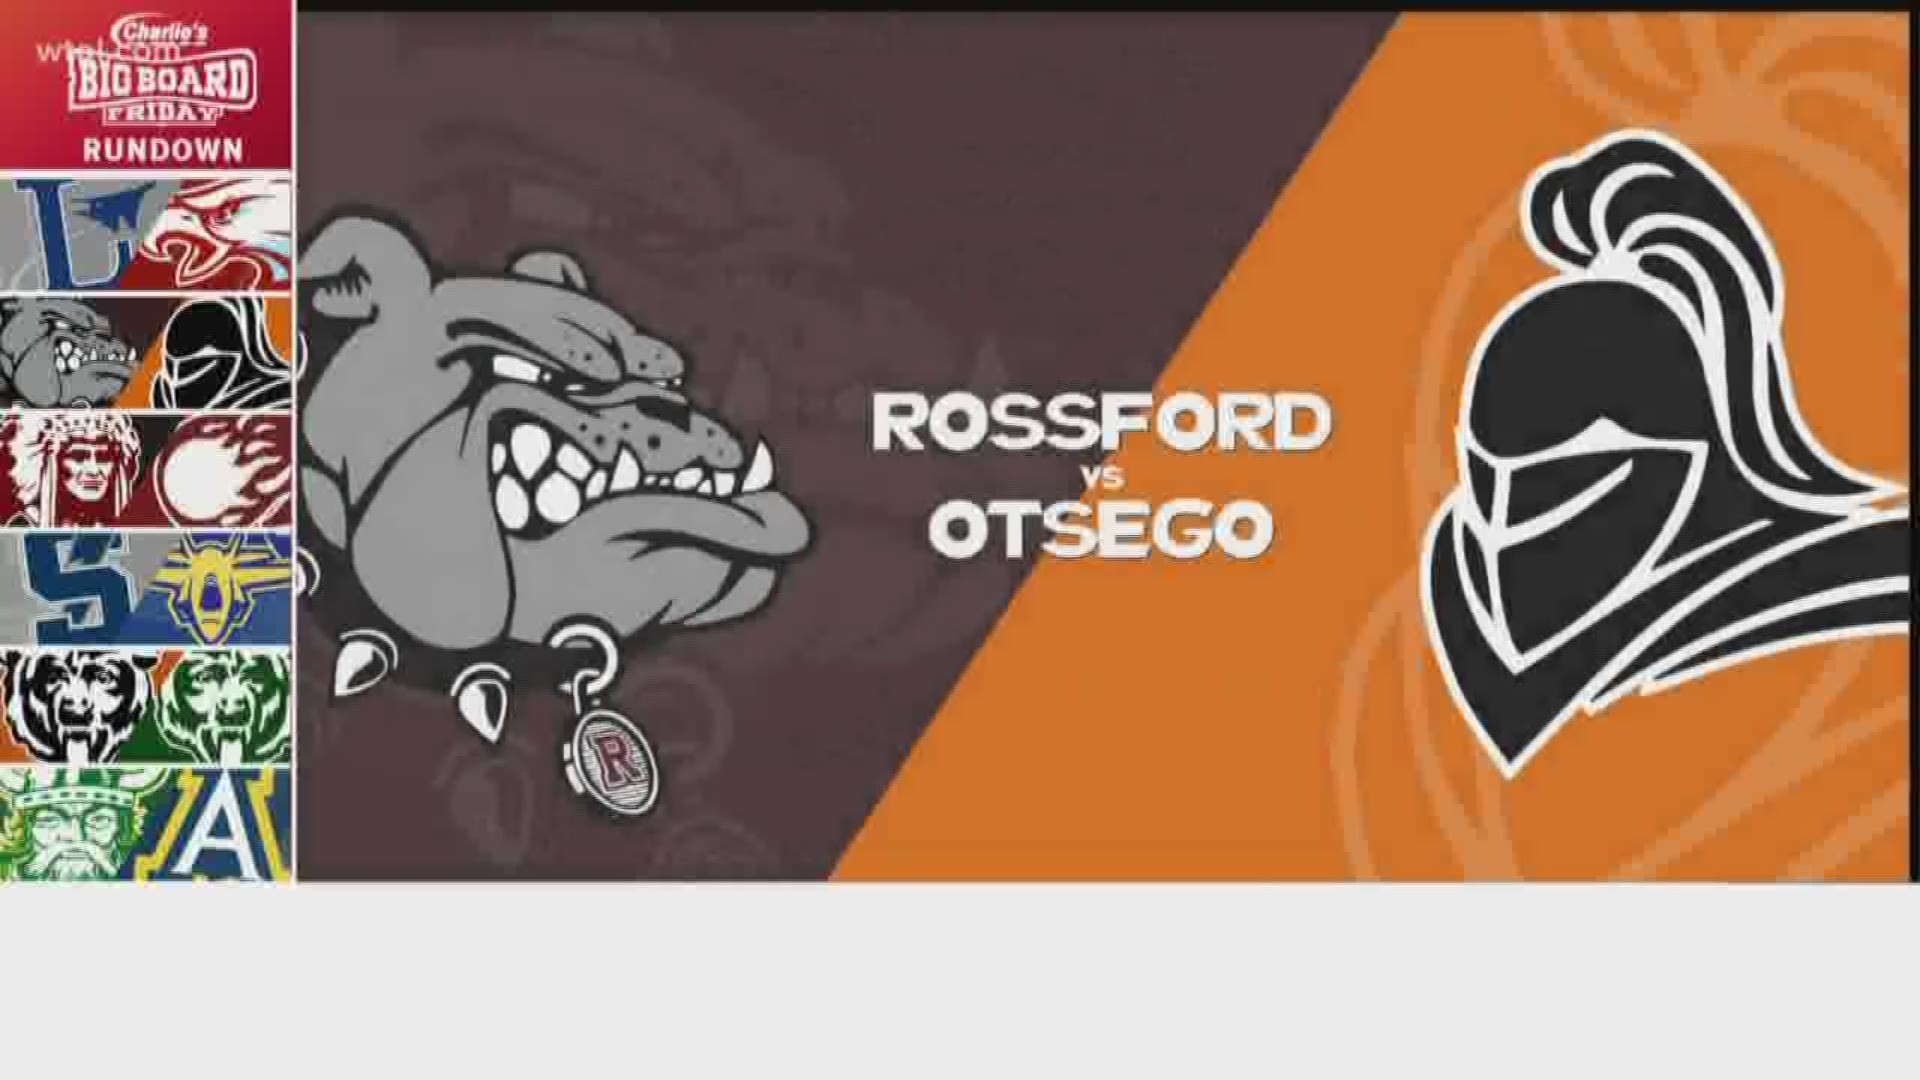 Rossford would win it 31-28